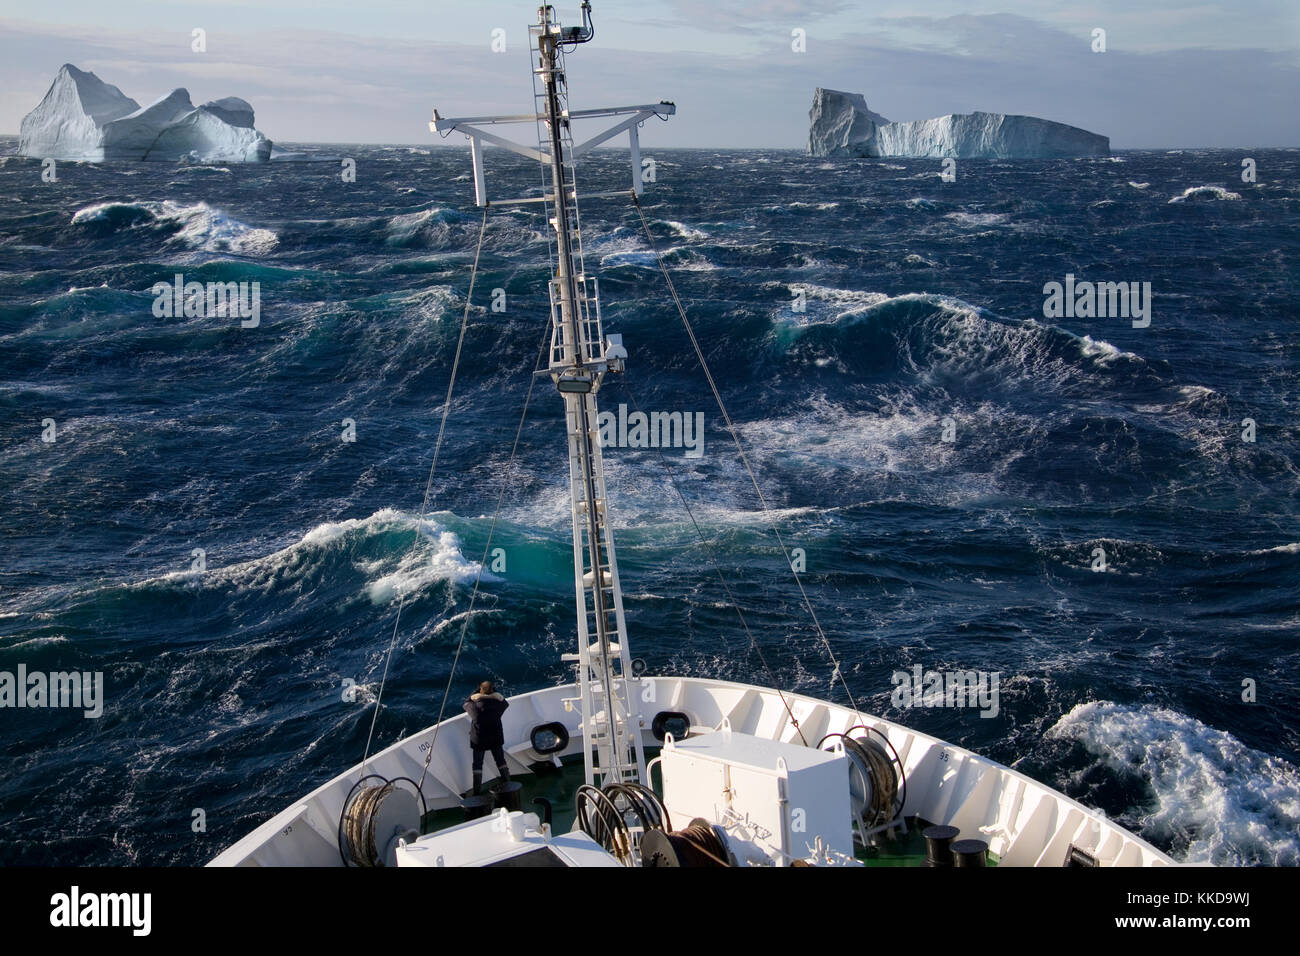 A ship rolling in heavy seas near iceburgs in Scoresbysund on the east coast of Greenland. Stock Photo